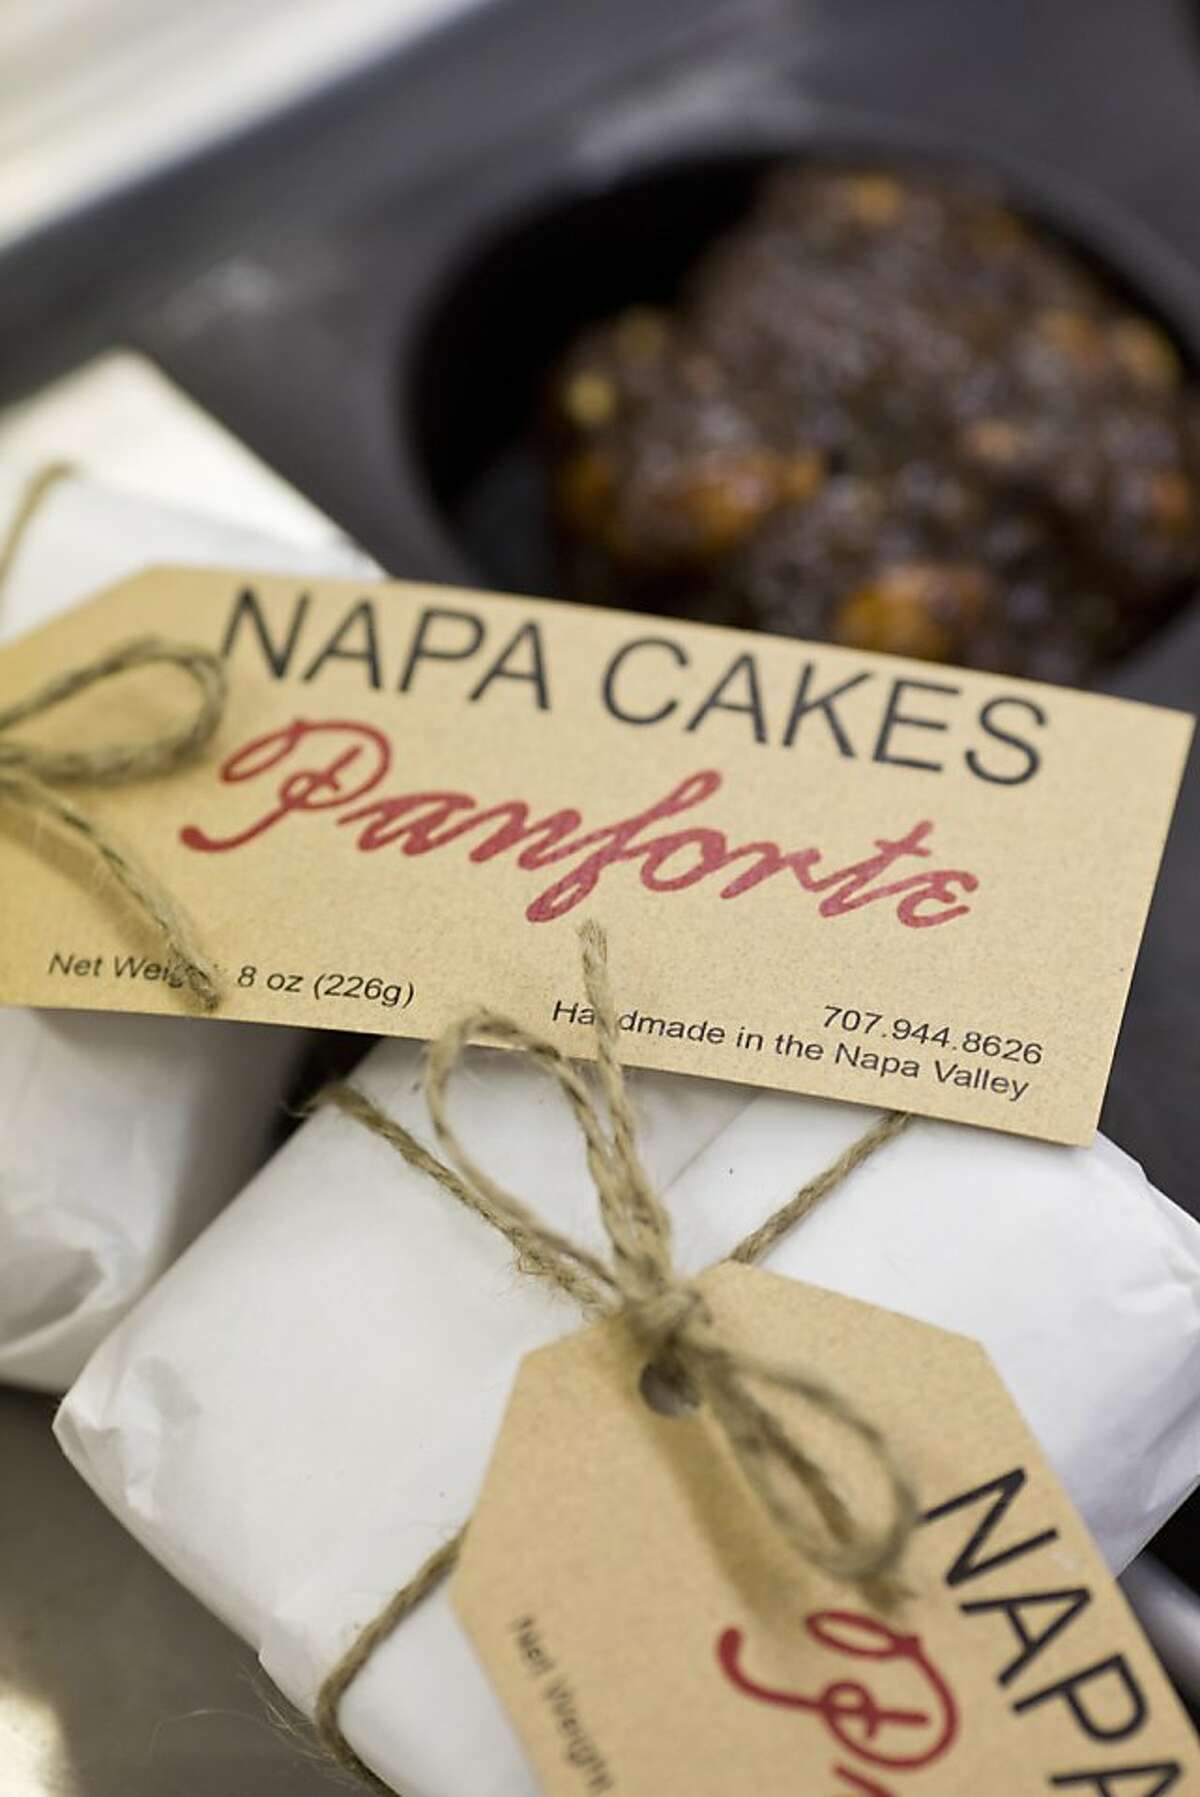 Napa Cakes Panforte, made by hand by Marjorie Caldwell, are available in stores like Bi-Rite markets and other boutique stores in Napa, Calif., Friday, October 4, 2013.